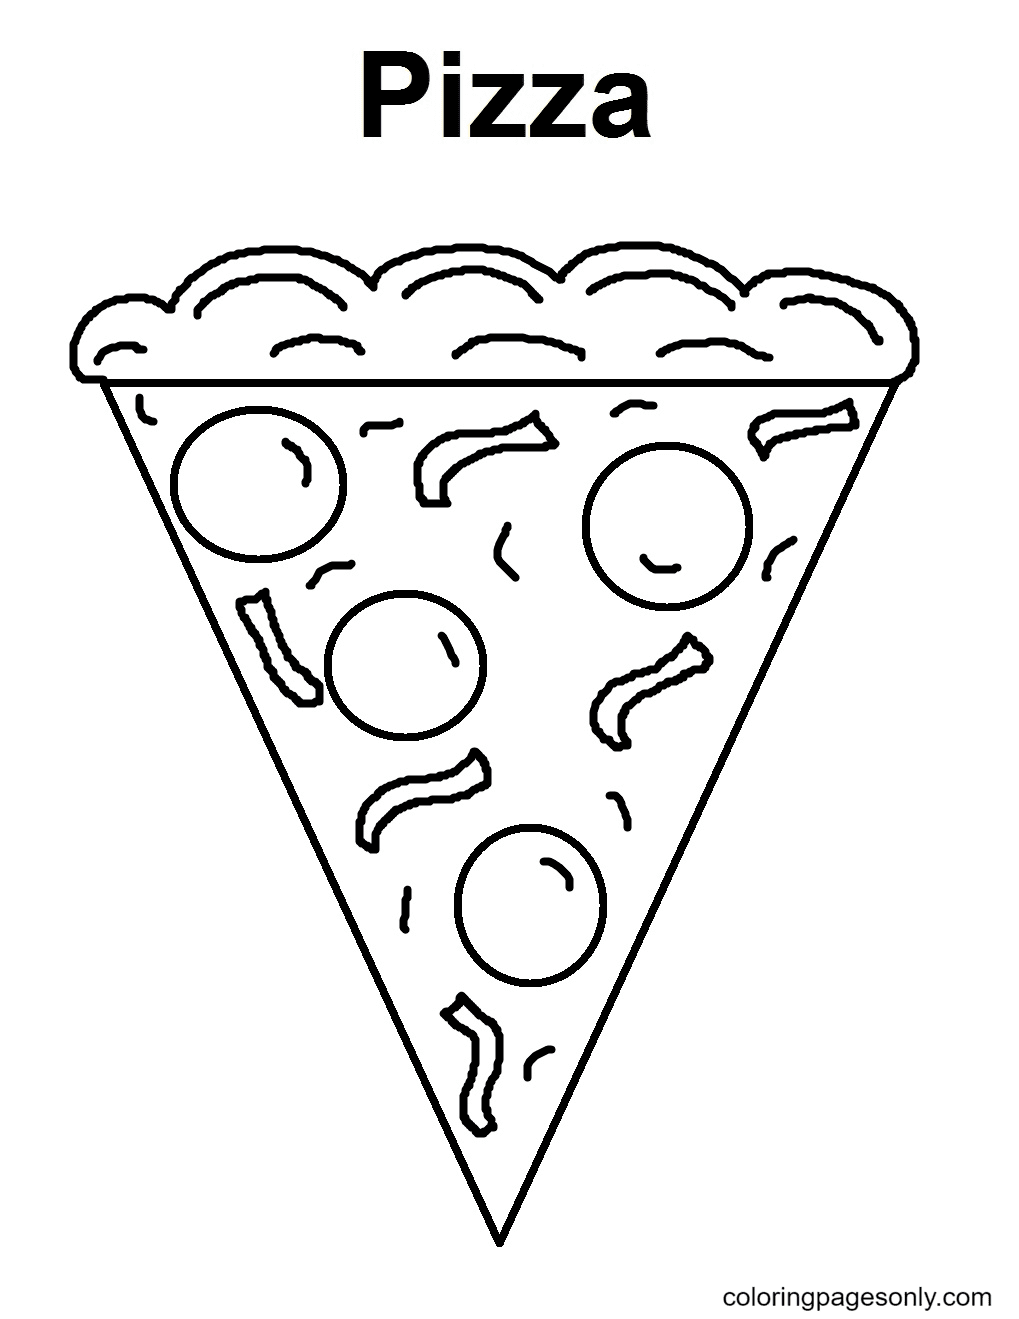 Printable Slices of Pizza Coloring Pages